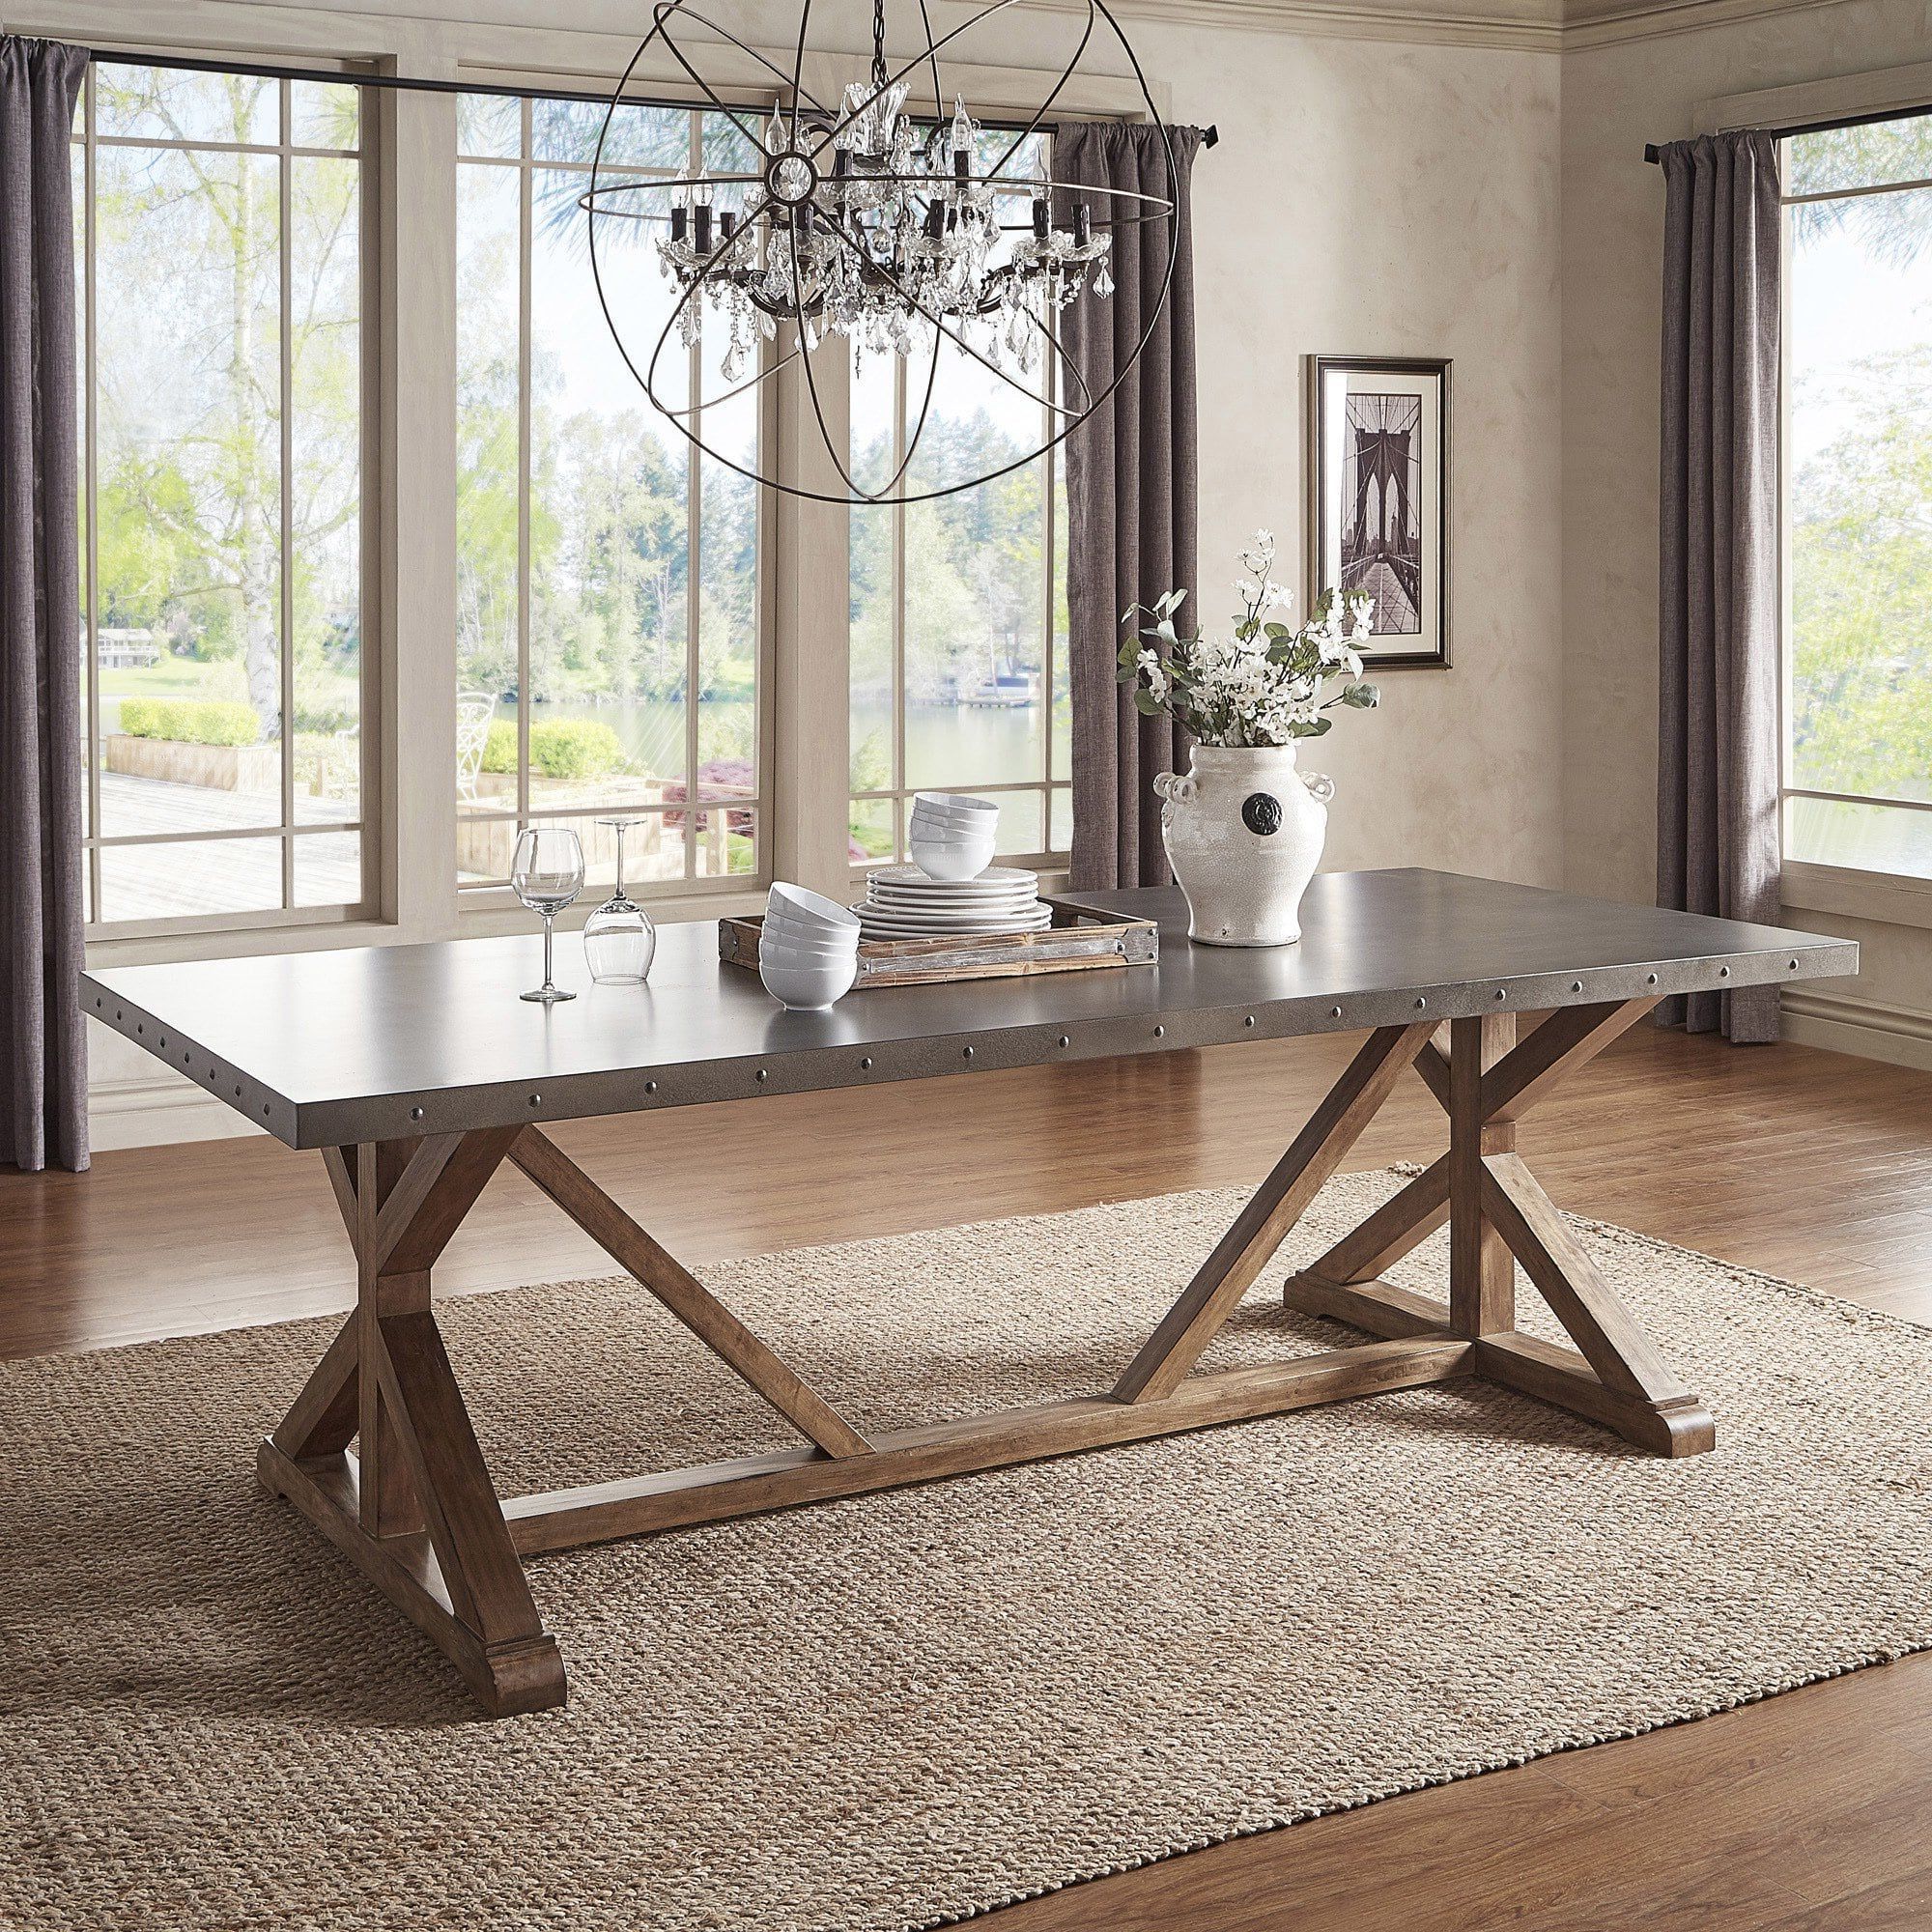 Well Known Rhiannon Poplar Solid Wood Dining Tables With Regard To Albee Rectangular Stainless Steel Top Dining Table With (Gallery 6 of 20)